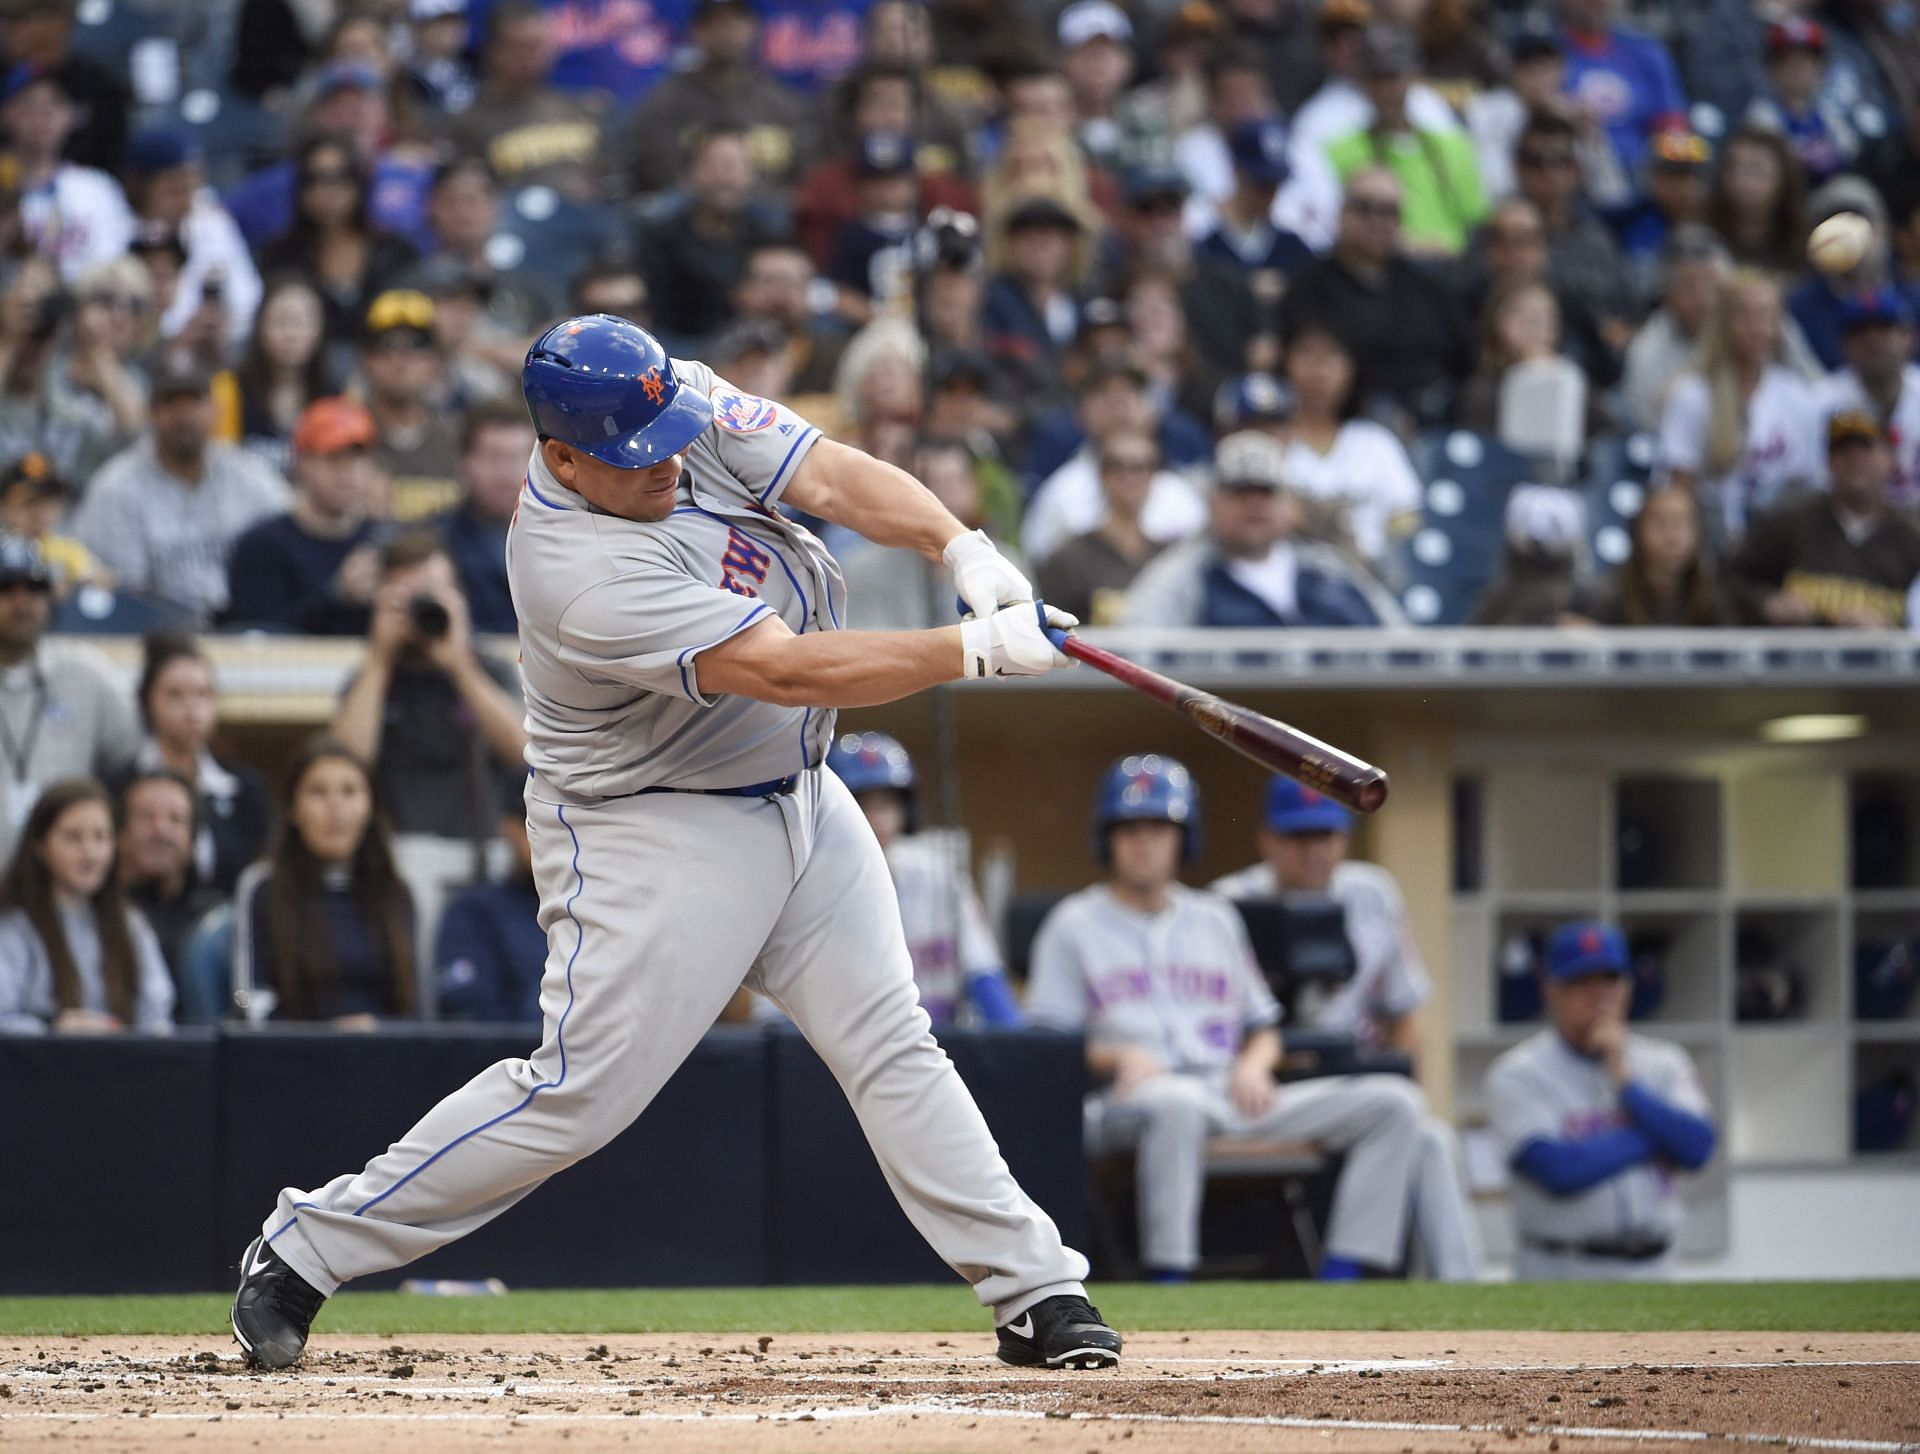 Bartolo Colon - 1st Pitch on HR Anniversary - 2023 Topps Now #595 Mets, PR:  595